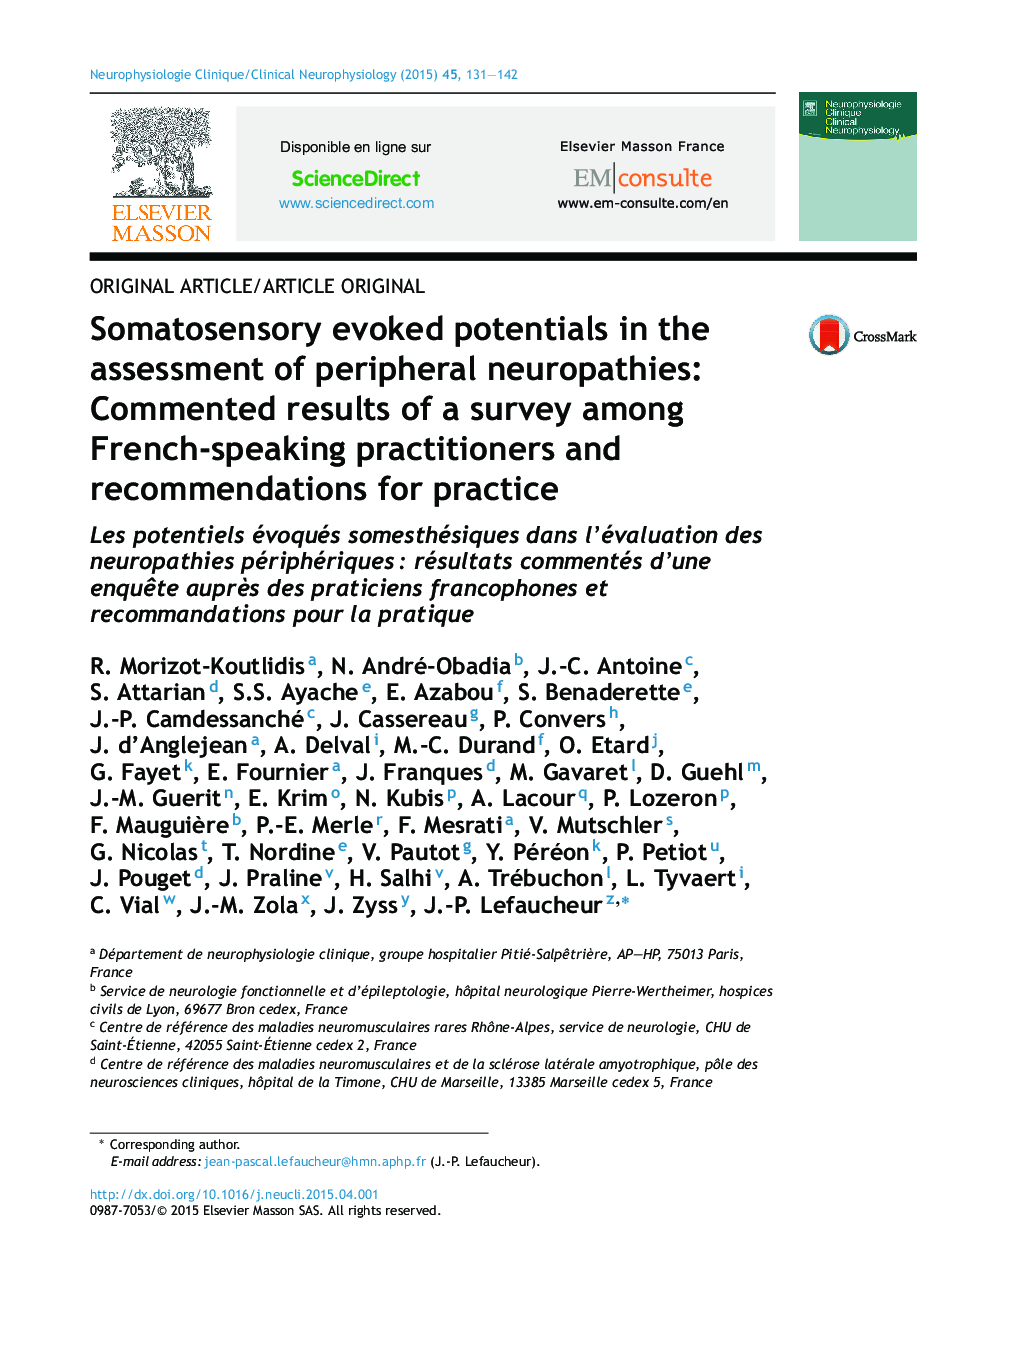 Somatosensory evoked potentials in the assessment of peripheral neuropathies: Commented results of a survey among French-speaking practitioners and recommendations for practice